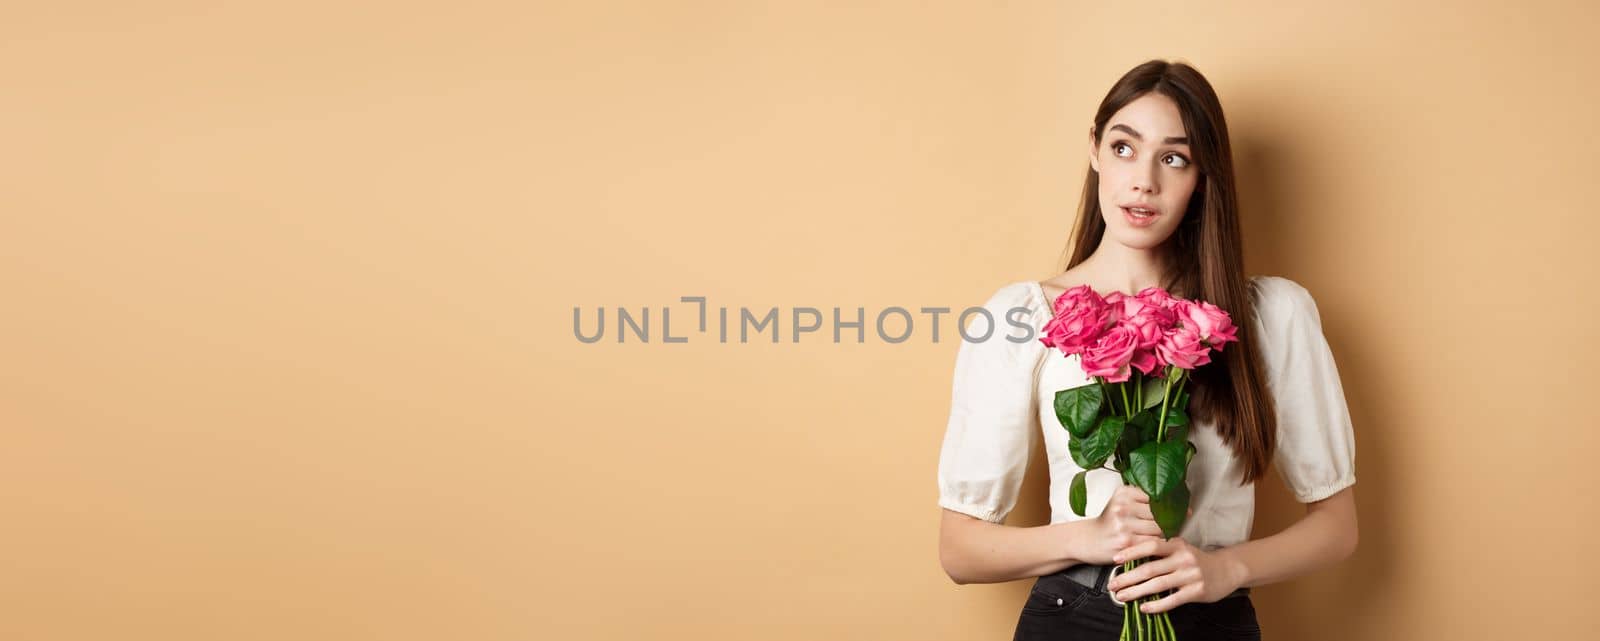 Romantic Valentines day concept. Dreamy woman with bouquet of pink rose, looking aside at logo, holding flowers on beige background.